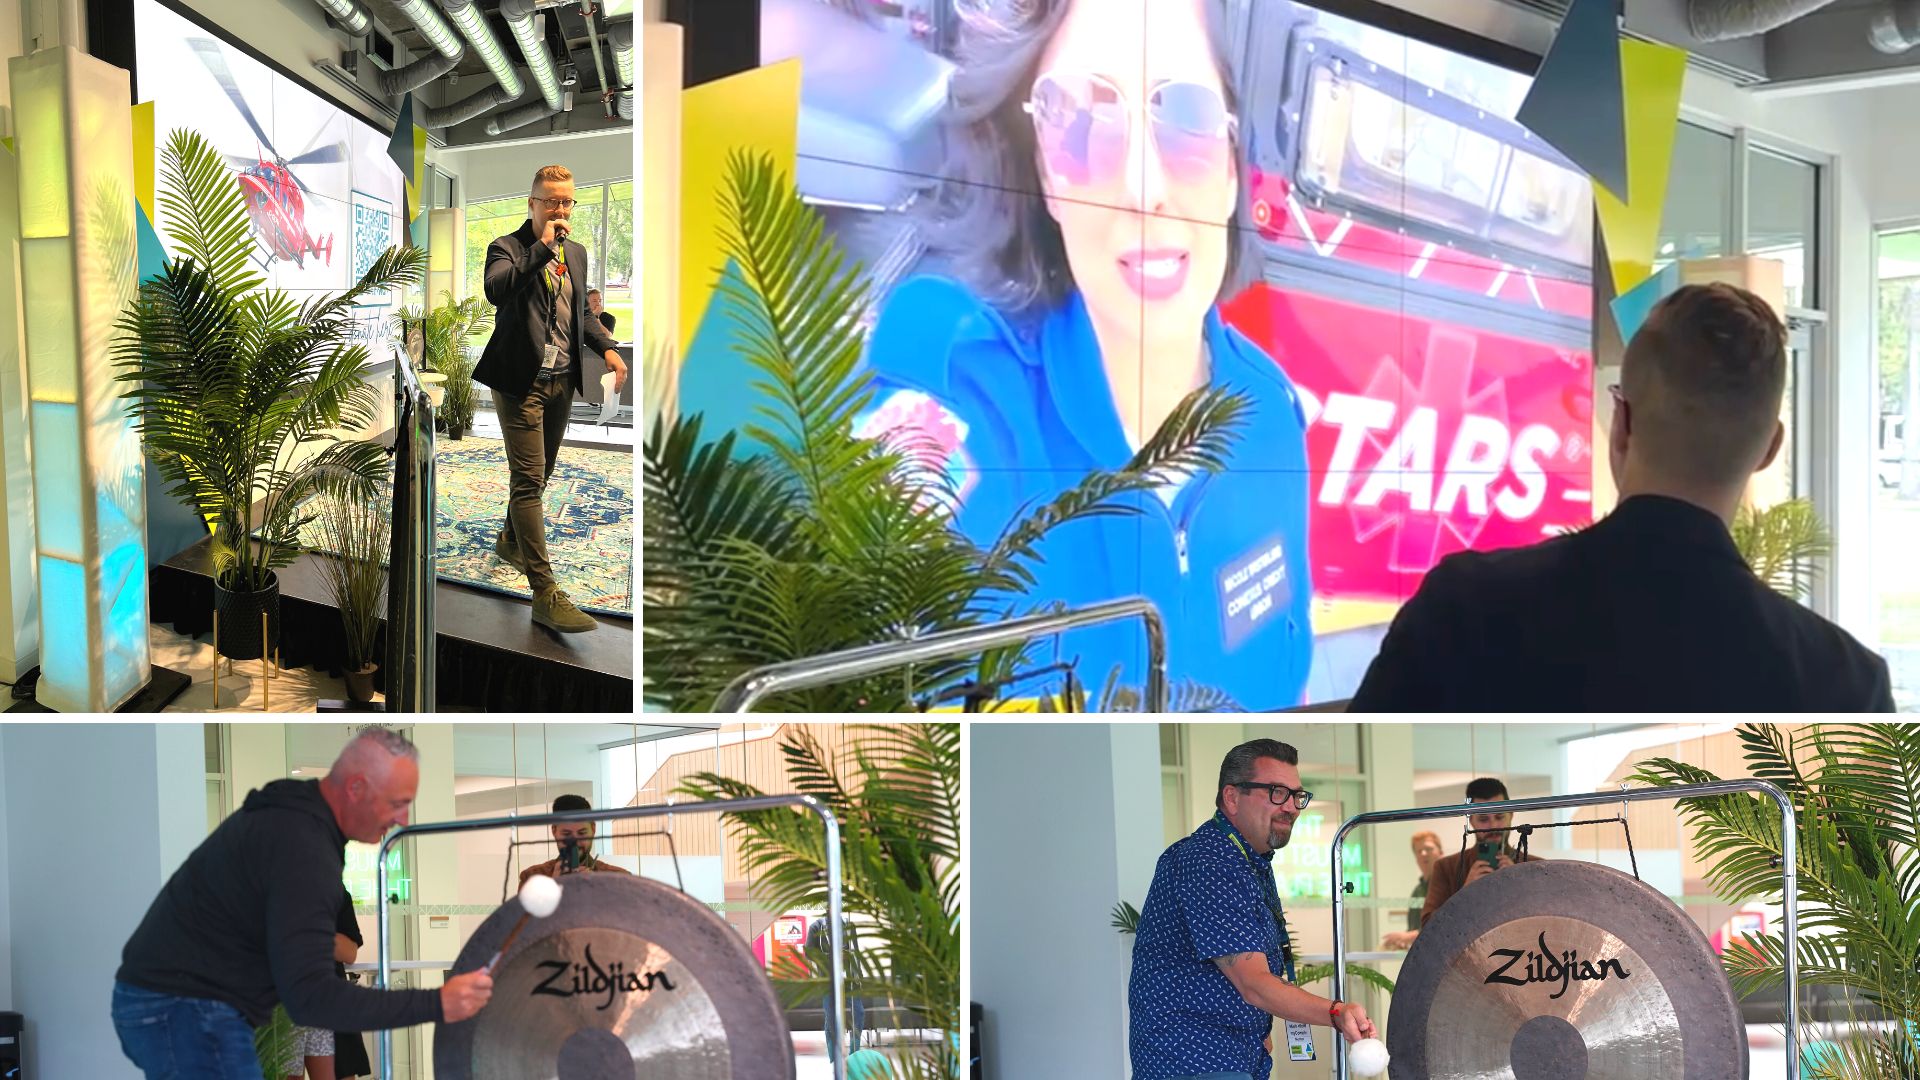 Collage of people hitting a large gong on stage at startup summit